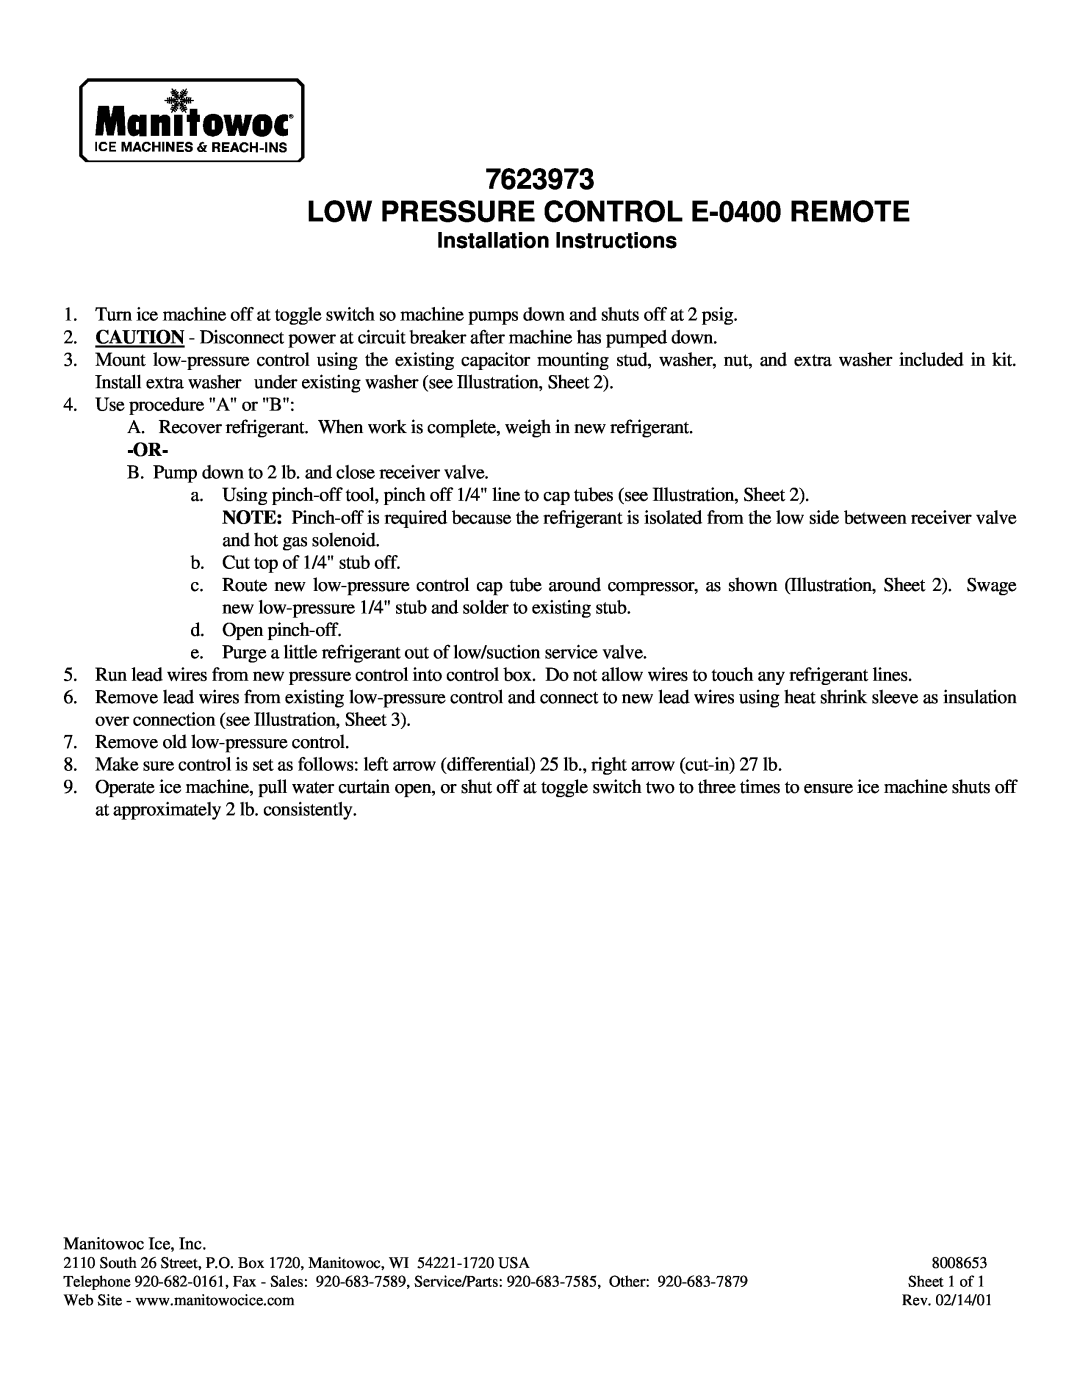 Manitowoc Ice installation instructions LOW PRESSURE CONTROL E-0400REMOTE, Installation Instructions 